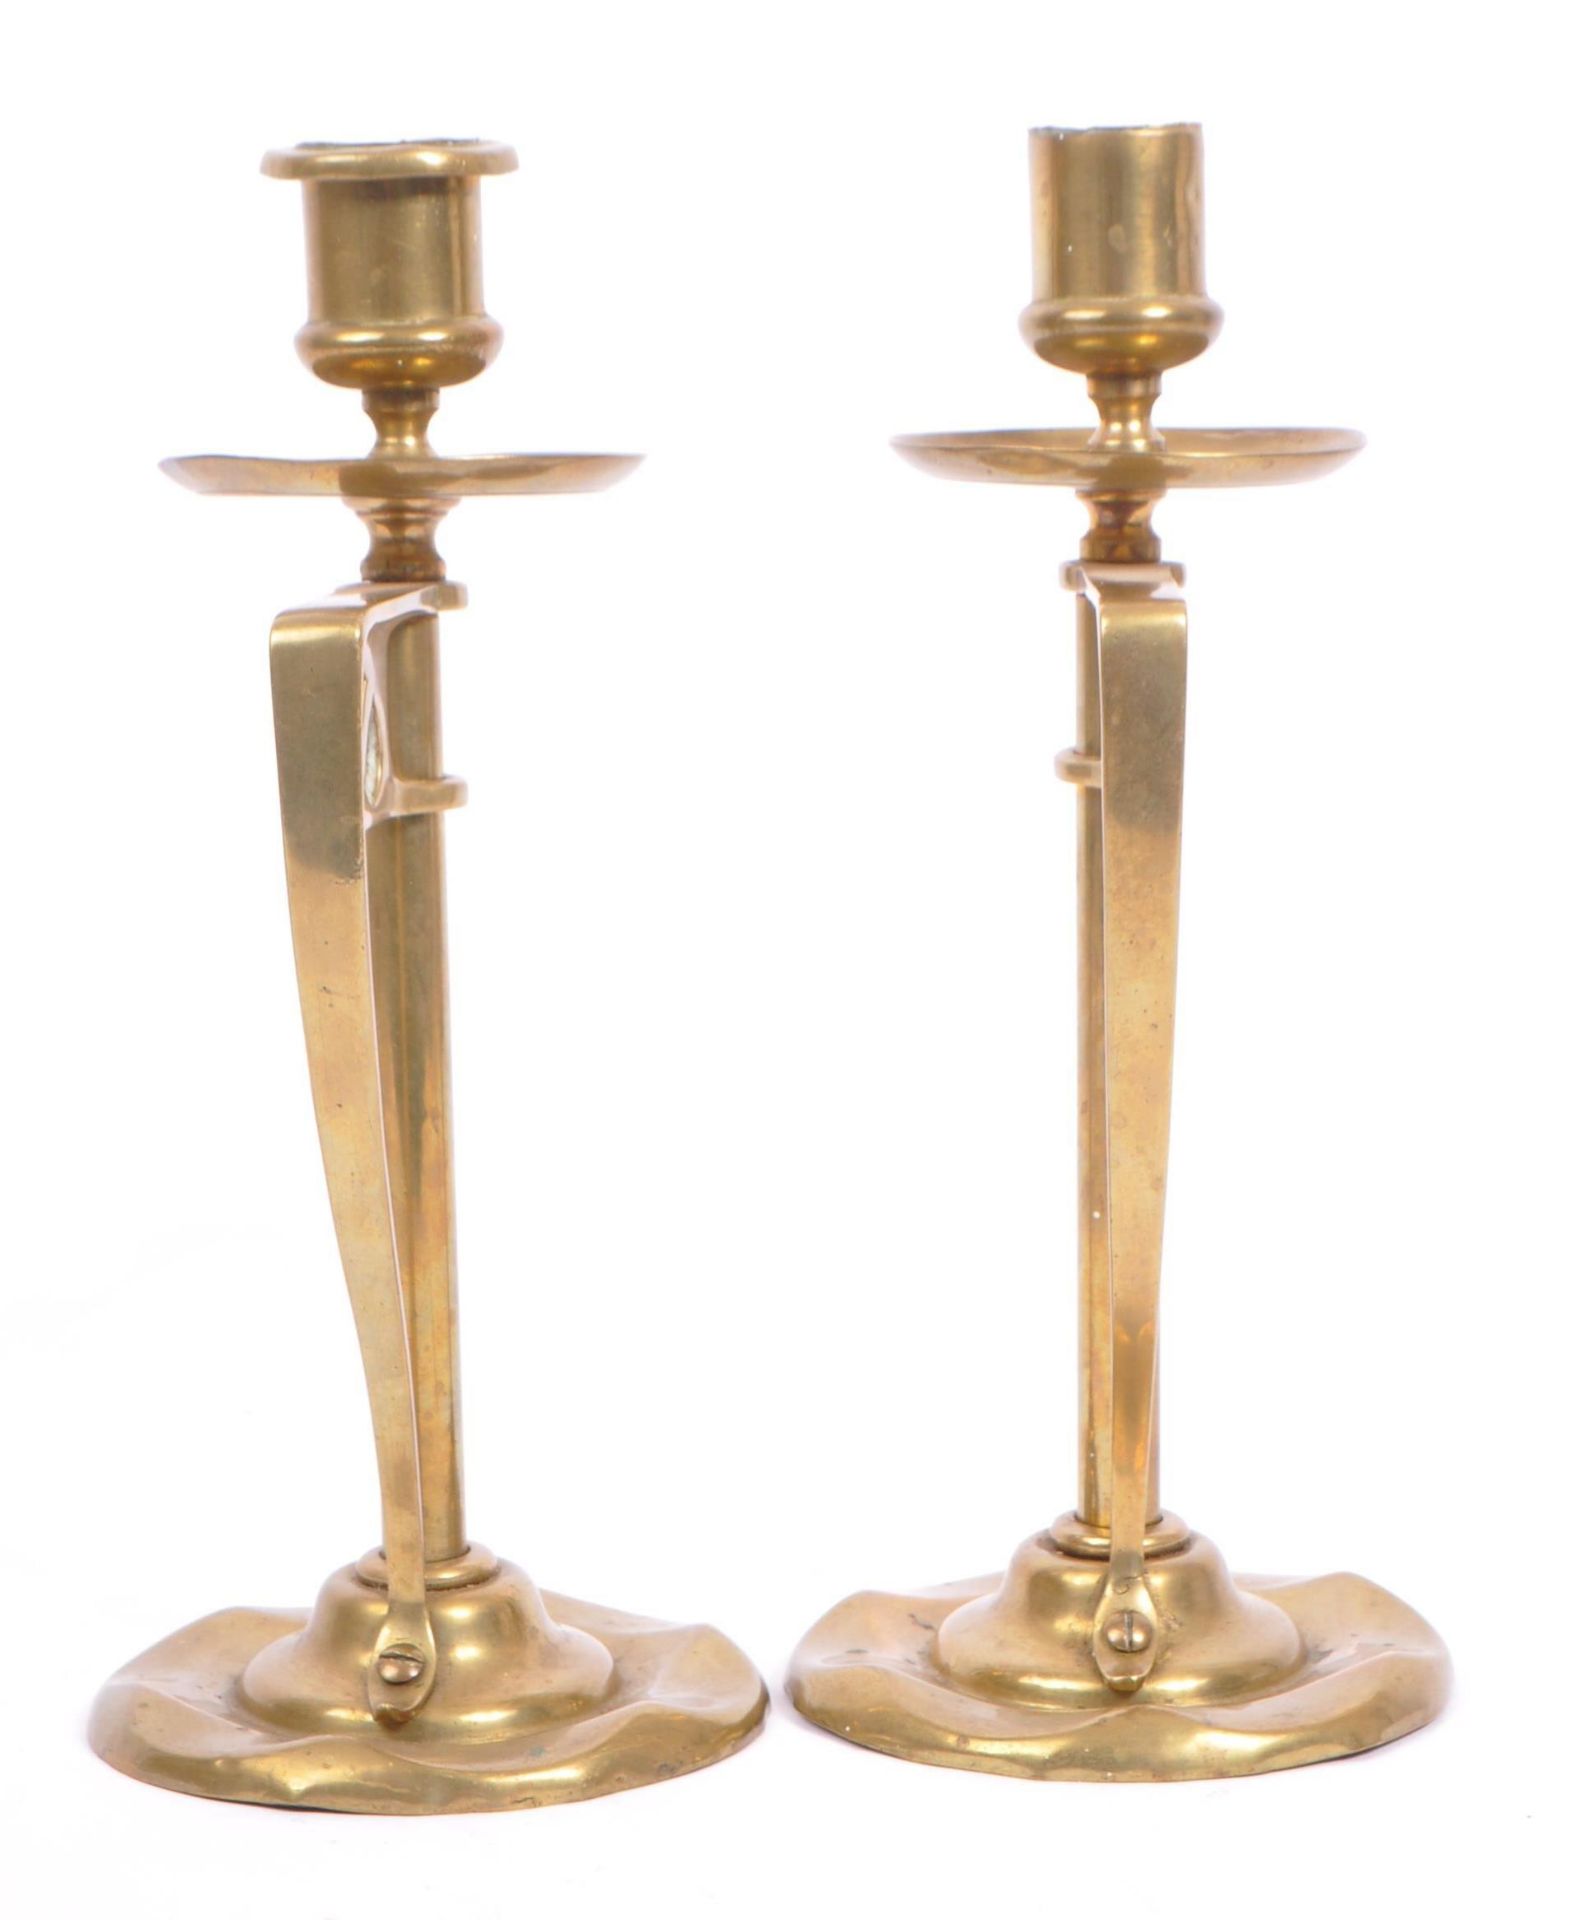 EARLY 20TH CENTURY ARTS & CRAFTS / ART NOUVEAU CANDLESTICKS - Image 2 of 7